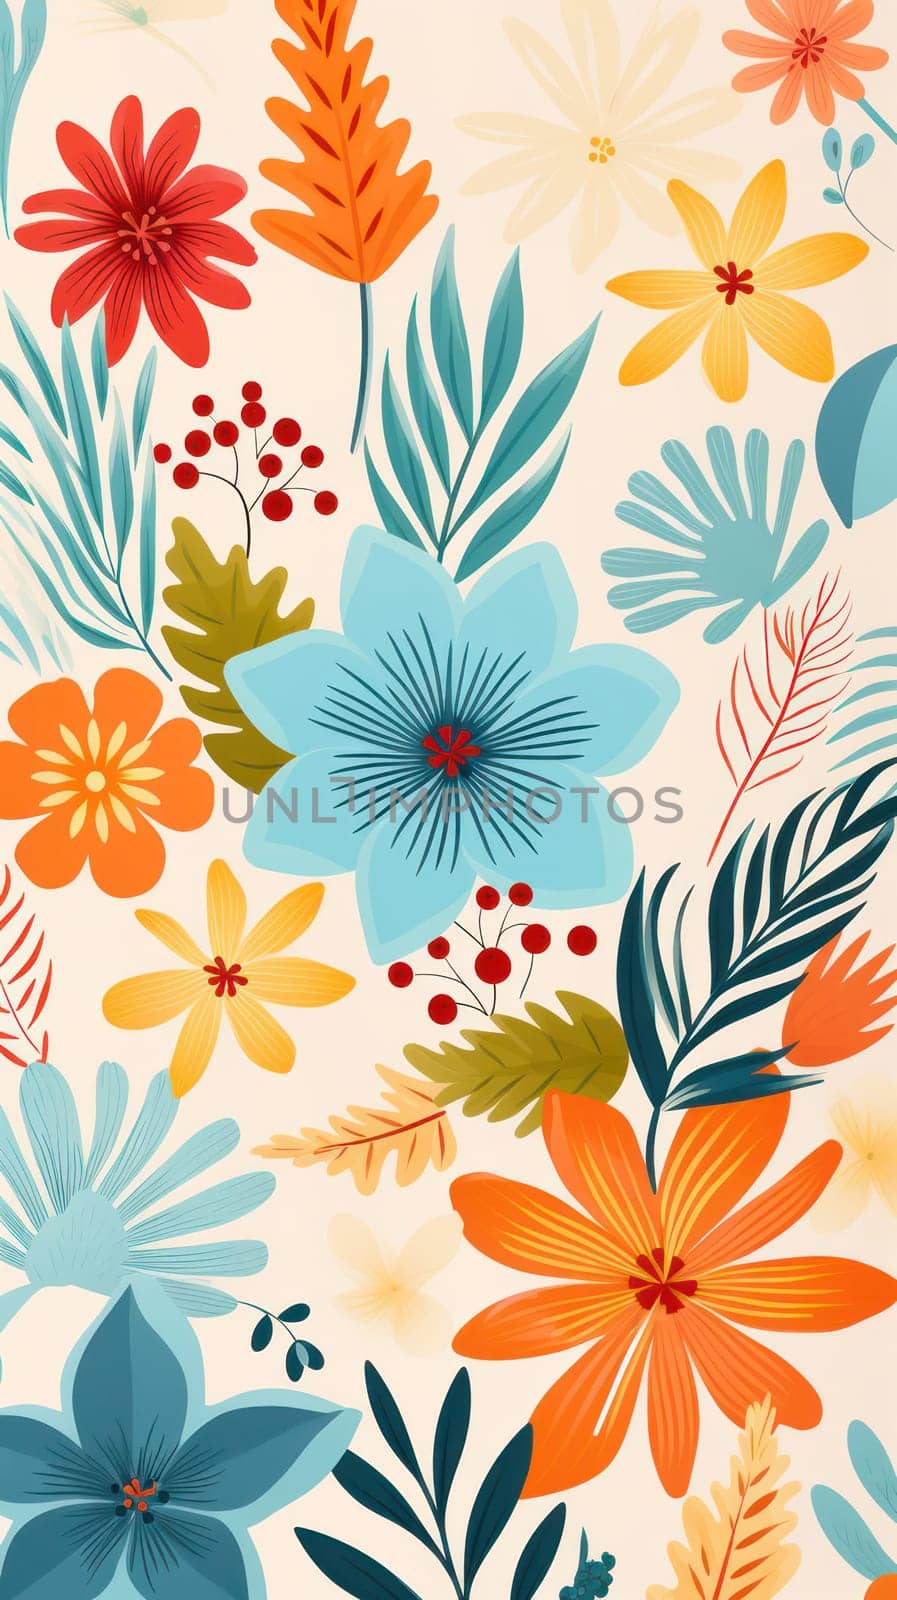 Seamless Floral Pattern with Summer Flowers, Leaves, and Plants on Nature Background - Illustrative Decorative Texture for Textile Fabric Design. by Vichizh